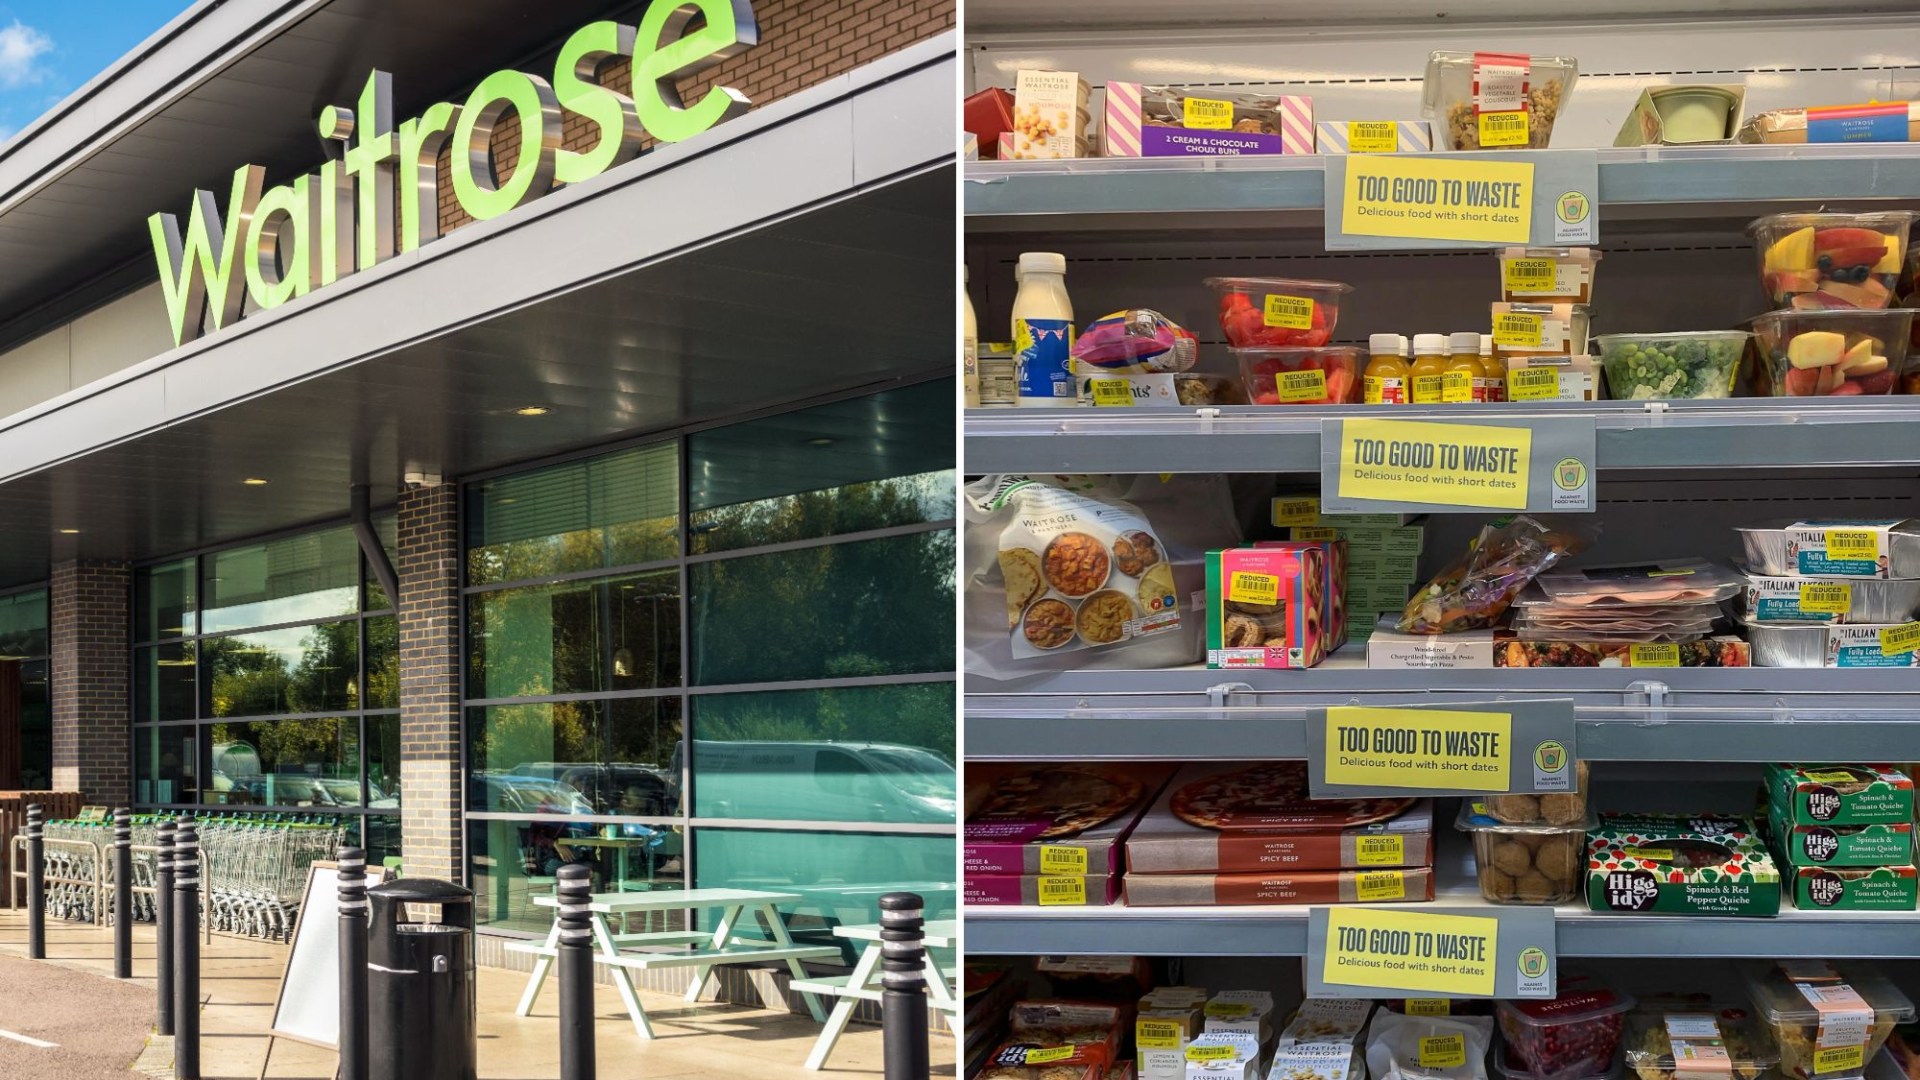 Waitrose Shopper’s ‘Unhealthy Winner’ Haul Leaves Others Green with Envy – See Reduced Prices!